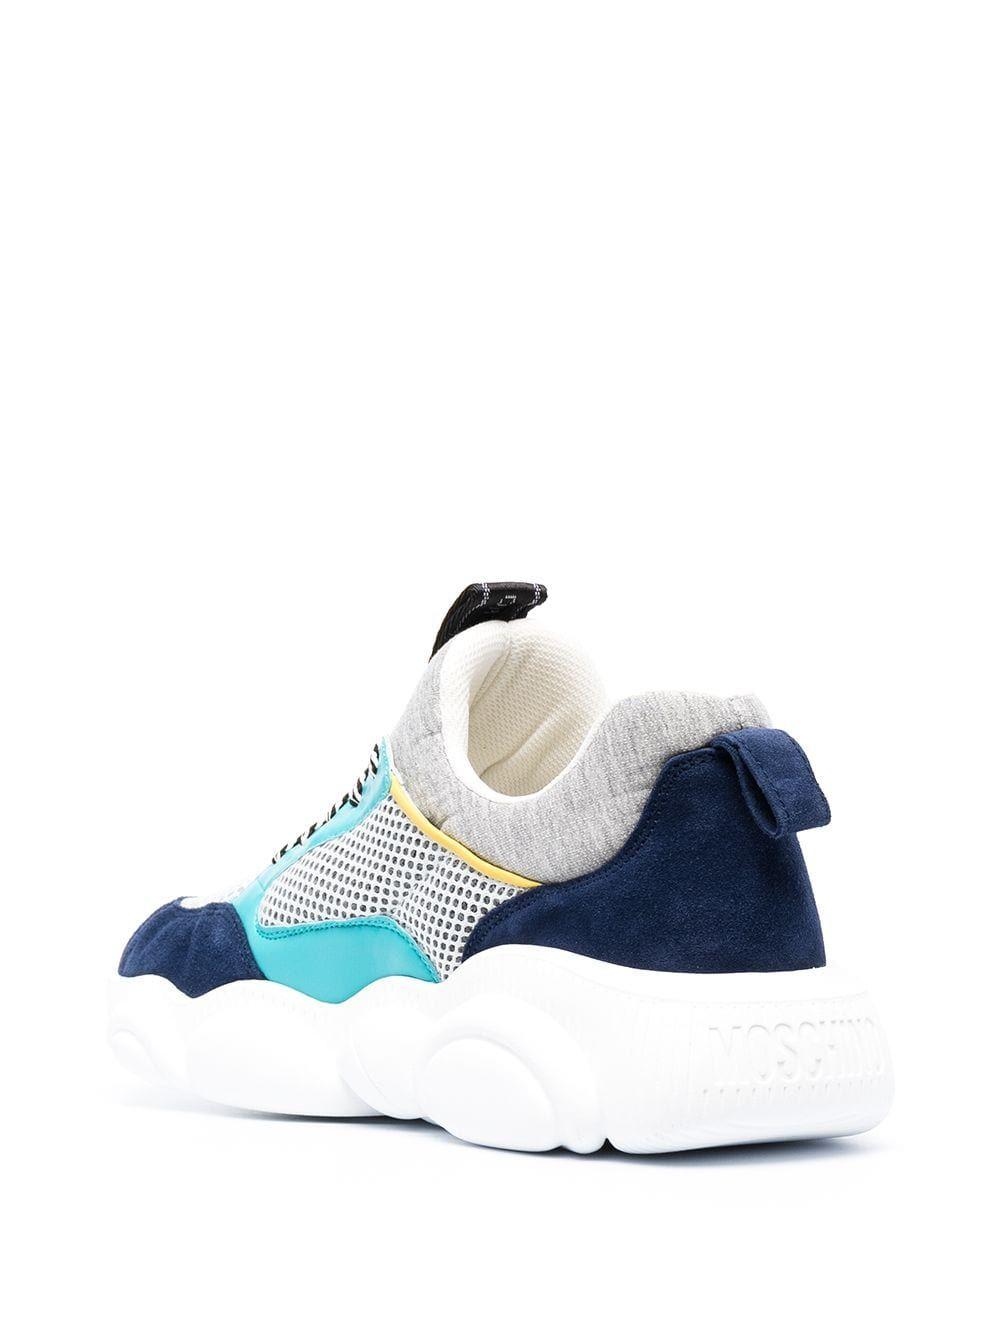 Moschino Leather Multi-panel Design Sneakers in Light Blue (Blue 